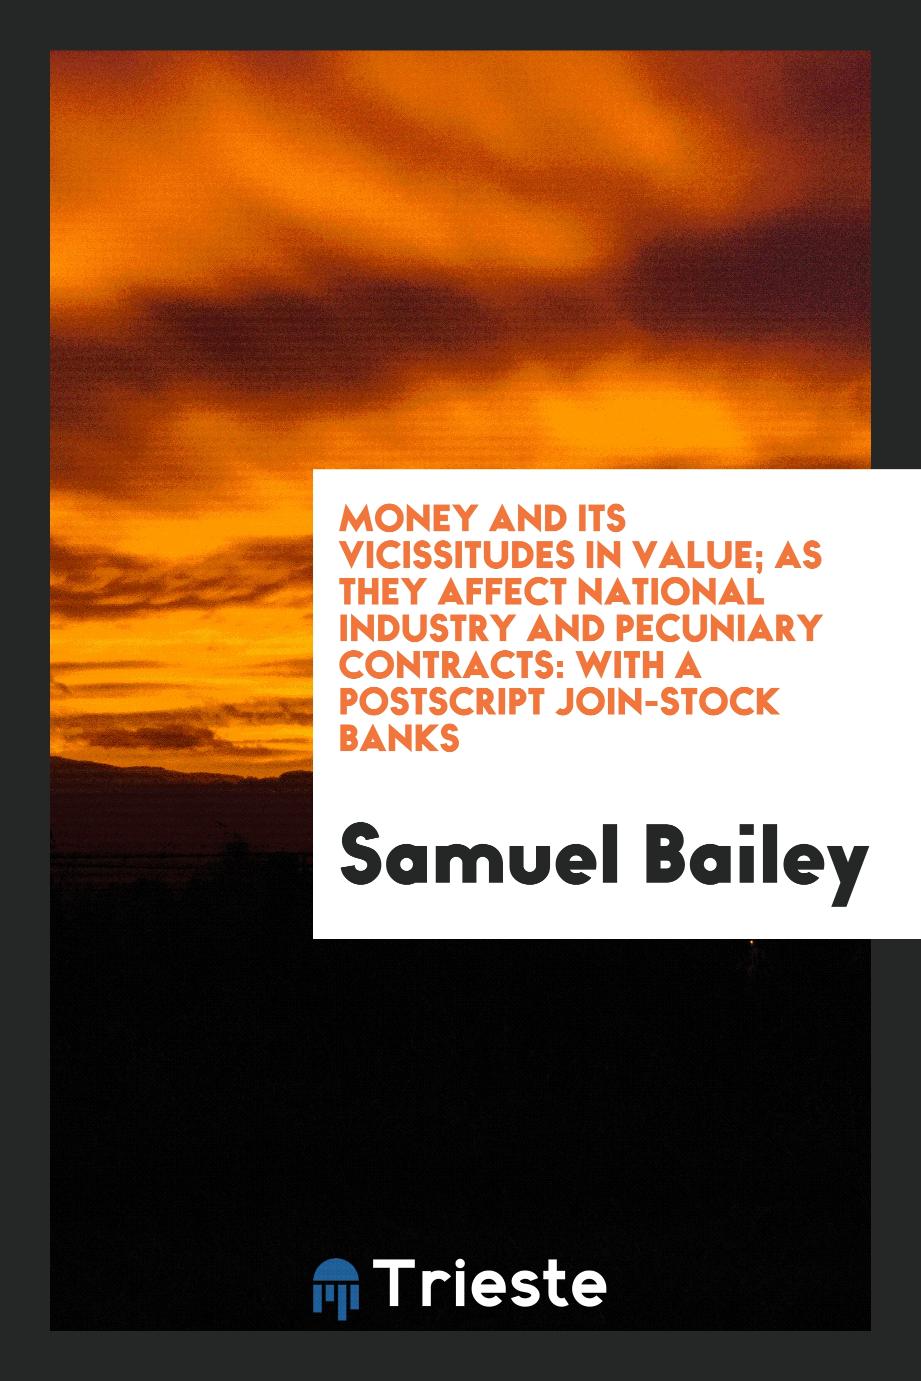 Money and its vicissitudes in value; as they affect national industry and pecuniary contracts: with a postscript join-stock banks